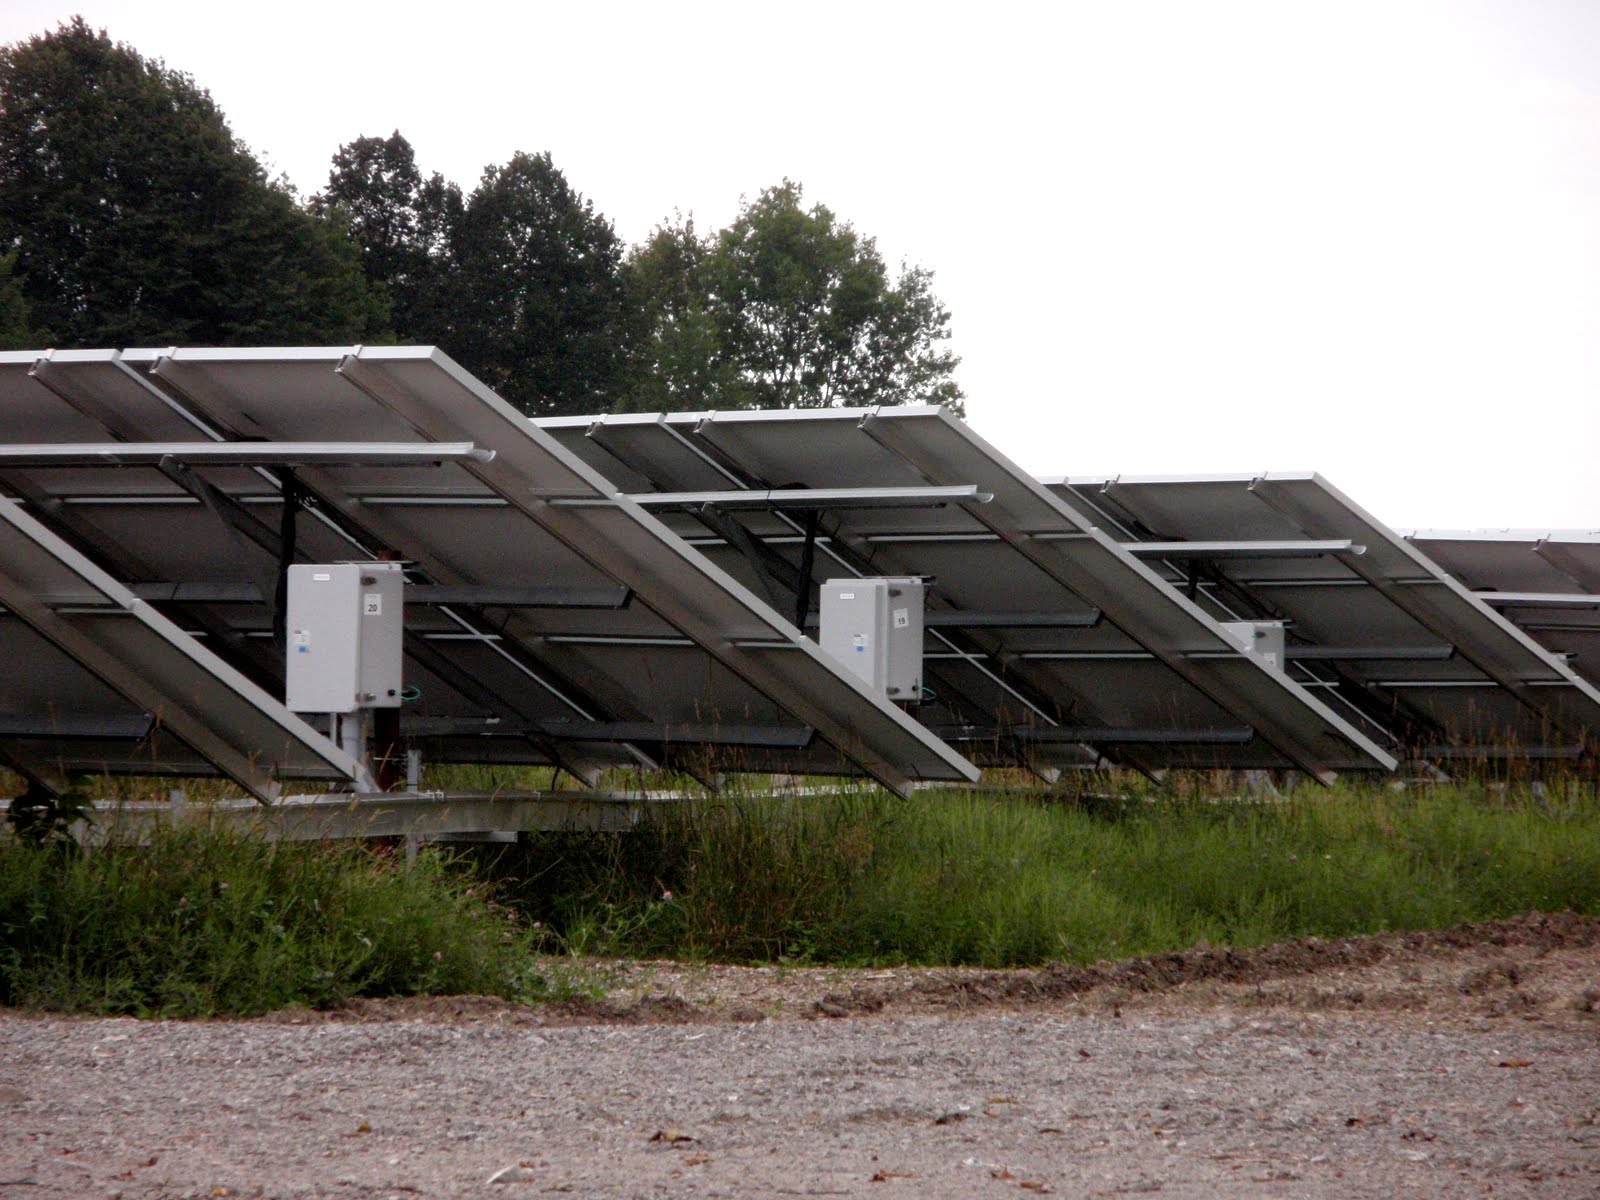 Ontario Government has very good incentives for solar power. You see lots of solar panels all over.